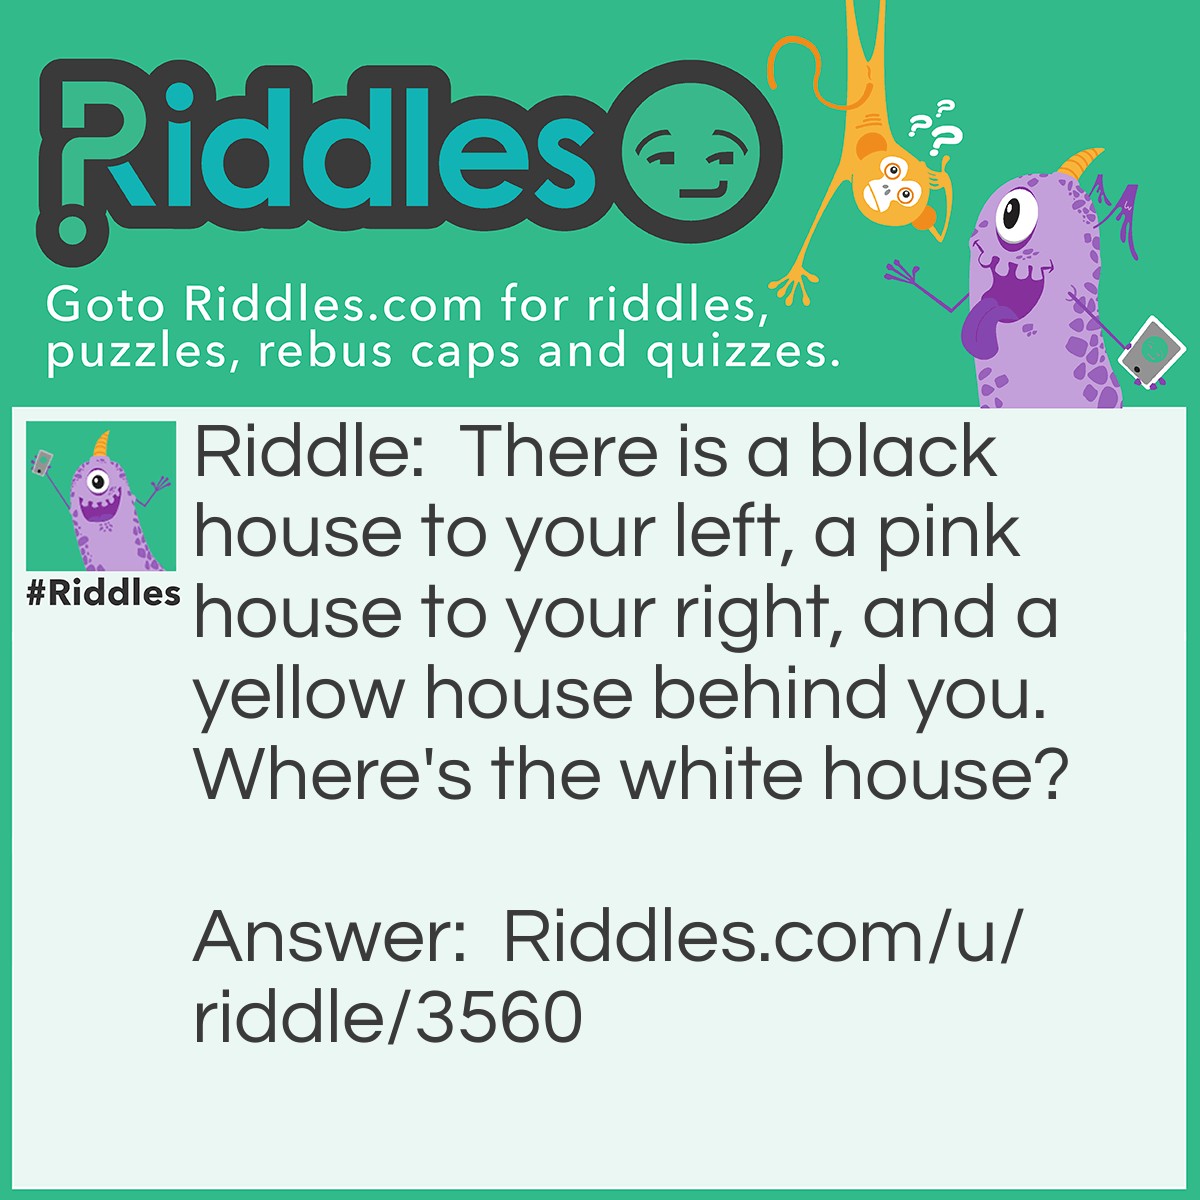 Riddle: There is a black house to your left, a pink house to your right, and a yellow house behind you. Where's the white house? Answer: In Washington, D.C.